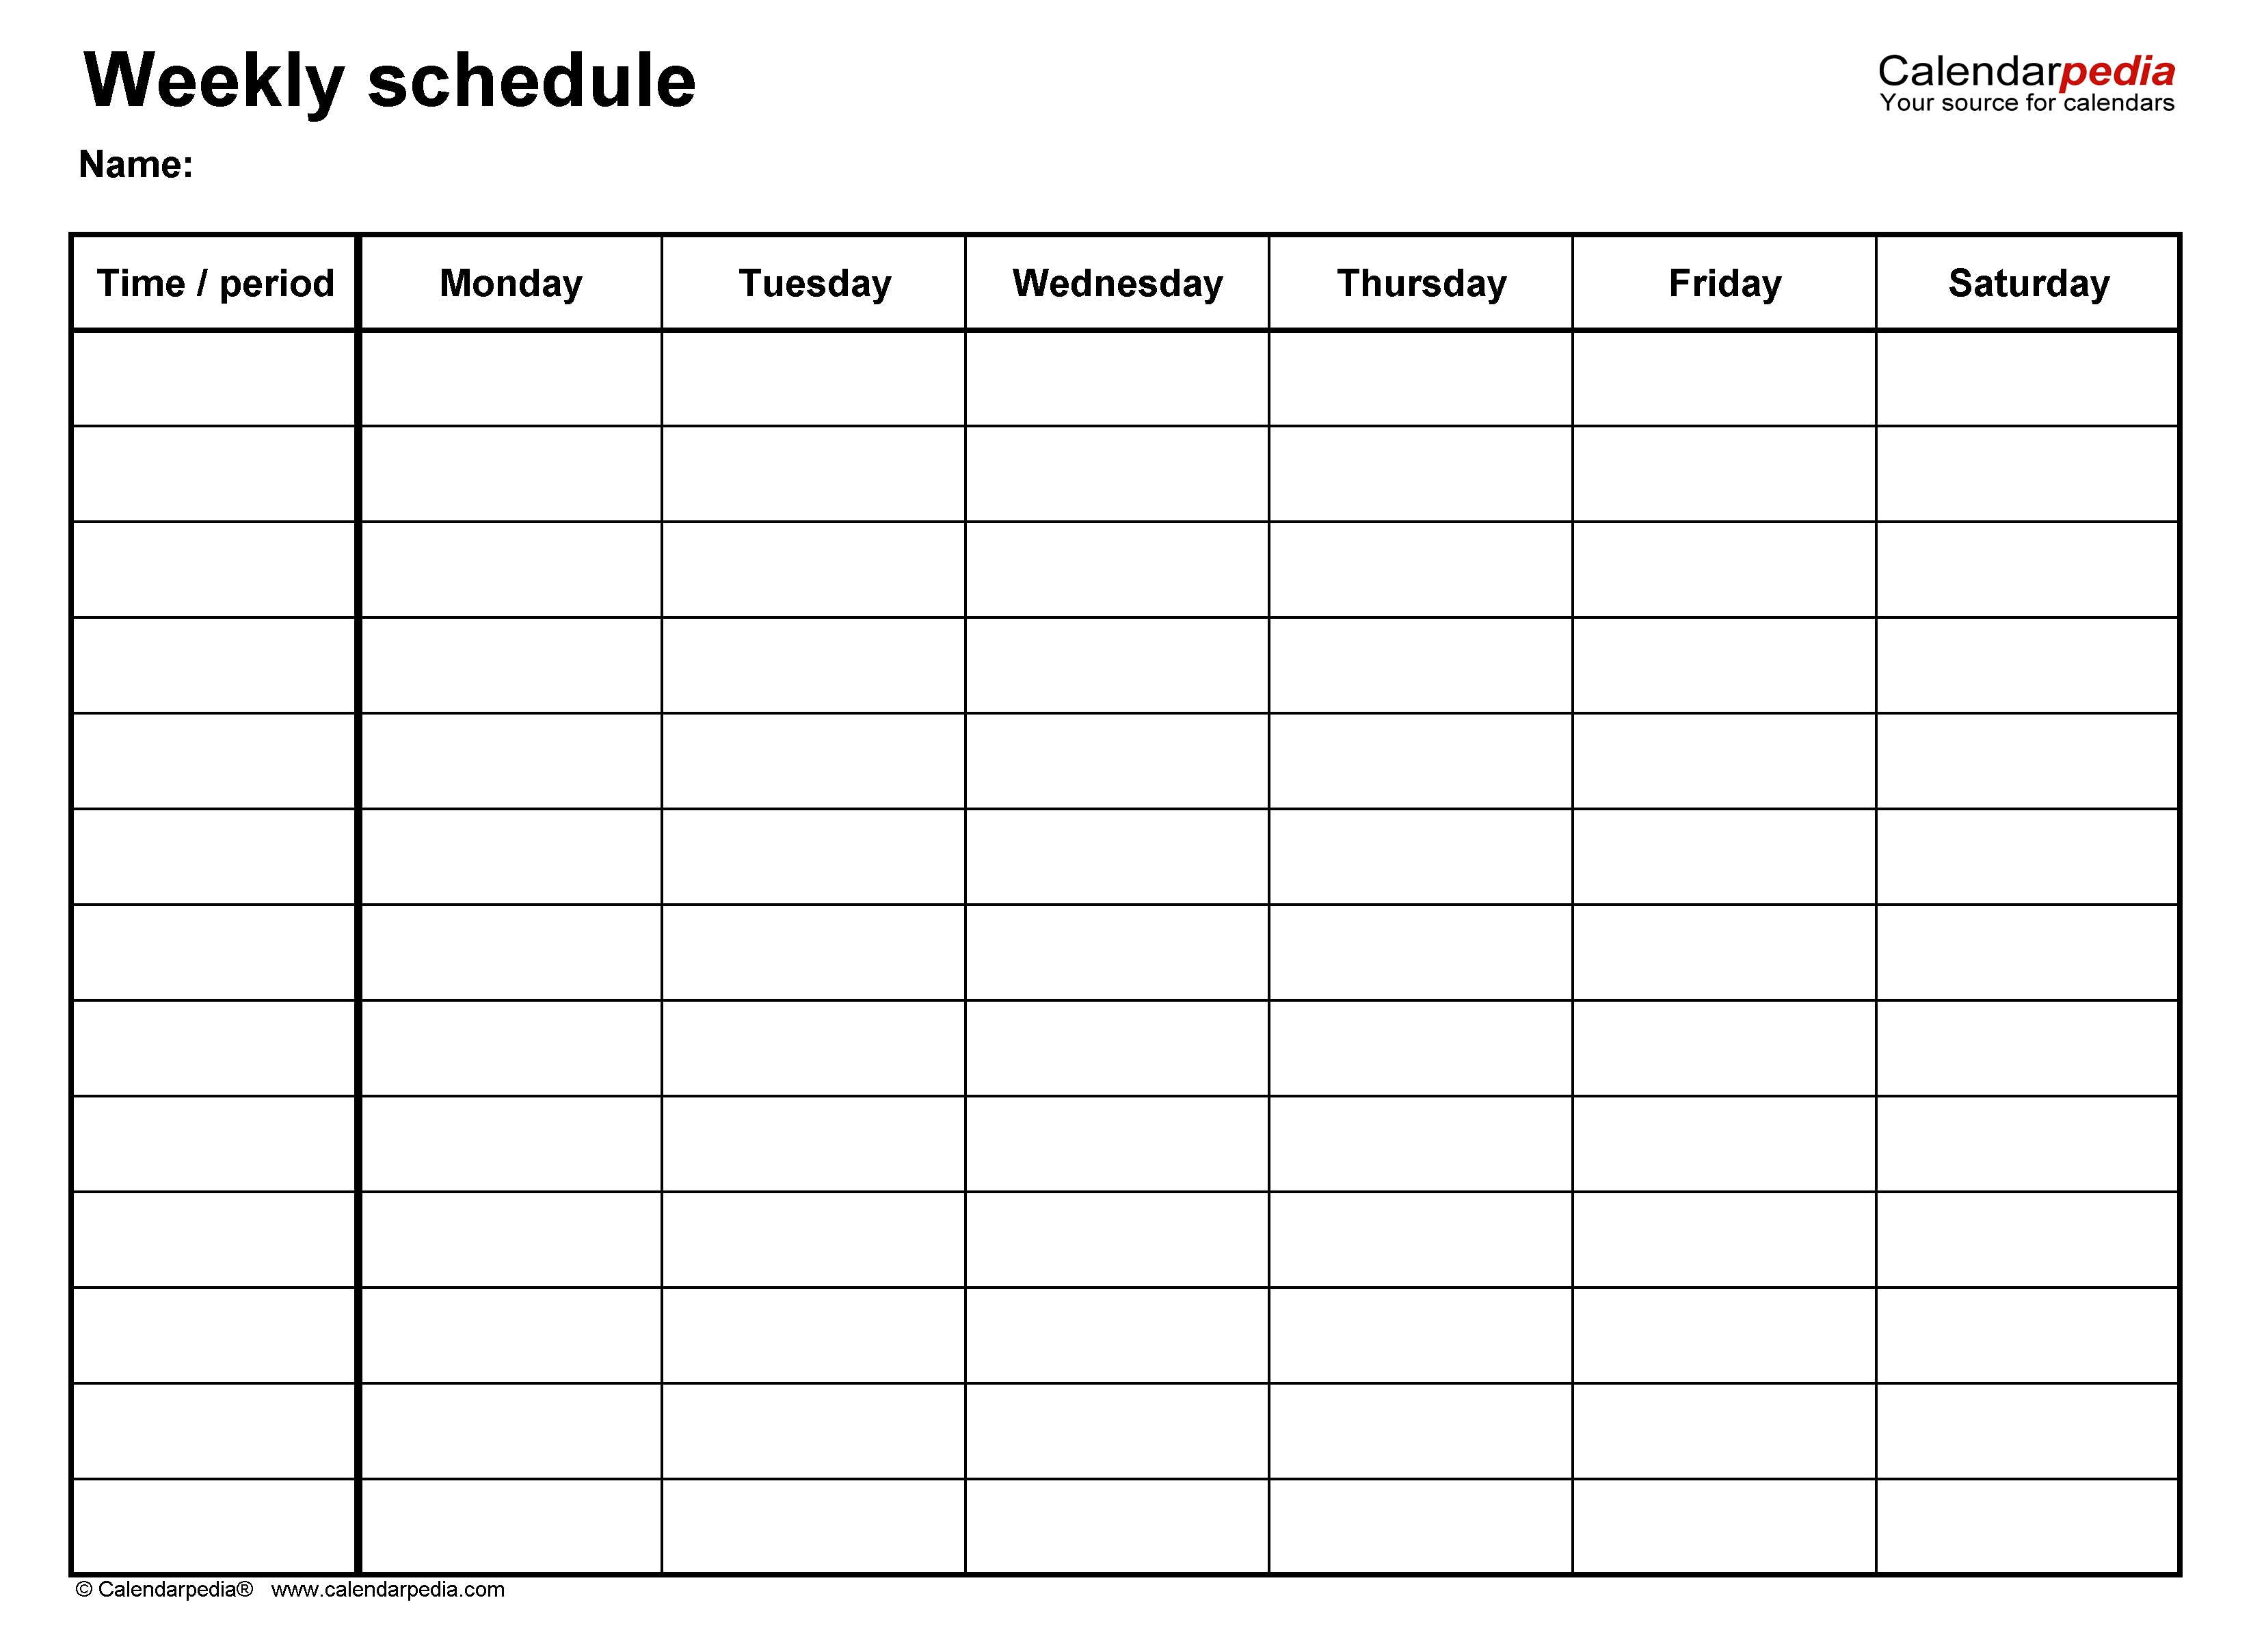 Free Weekly Schedules For Excel - 18 Templates Calendar Template 6 Weeks